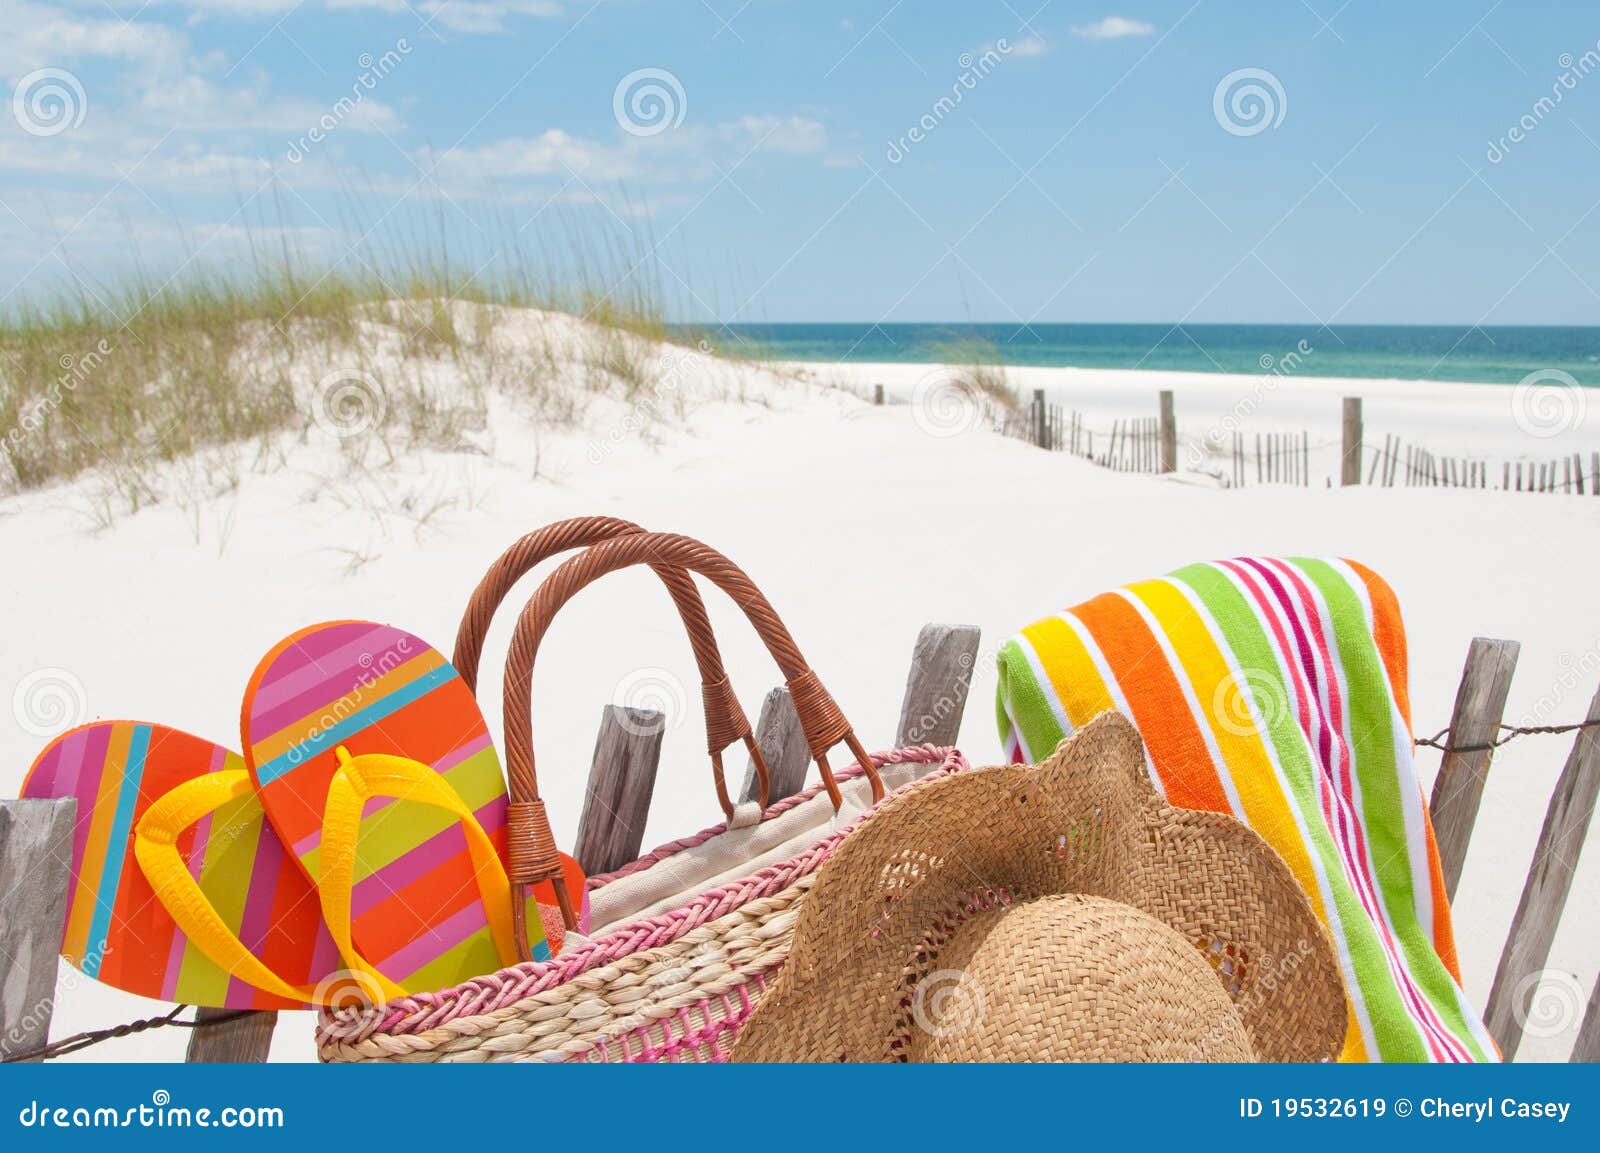 1,192 Beach Supplies Stock Photos - Free & Royalty-Free Stock Photos from  Dreamstime